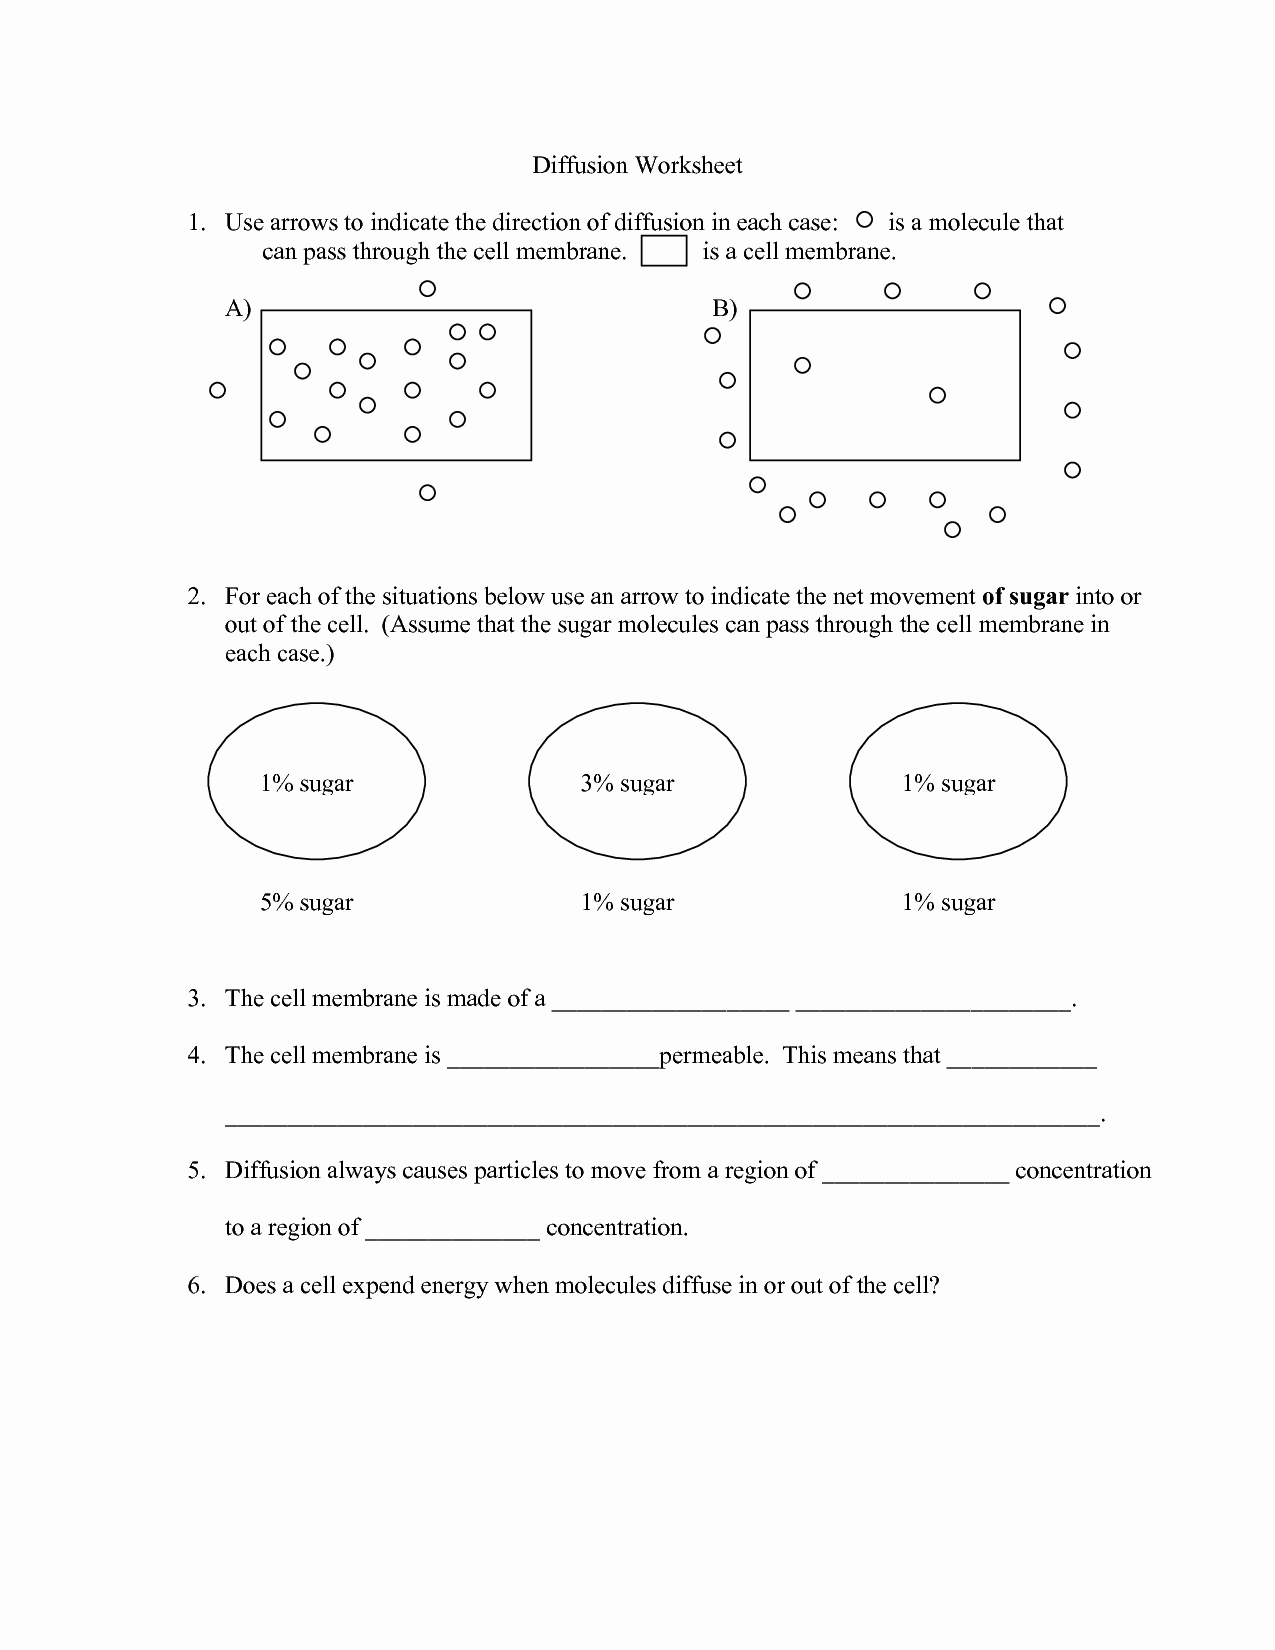 Diffusion and Osmosis Worksheet Answers Best Of Worksheet Diffusion Worksheet Grass Fedjp Worksheet